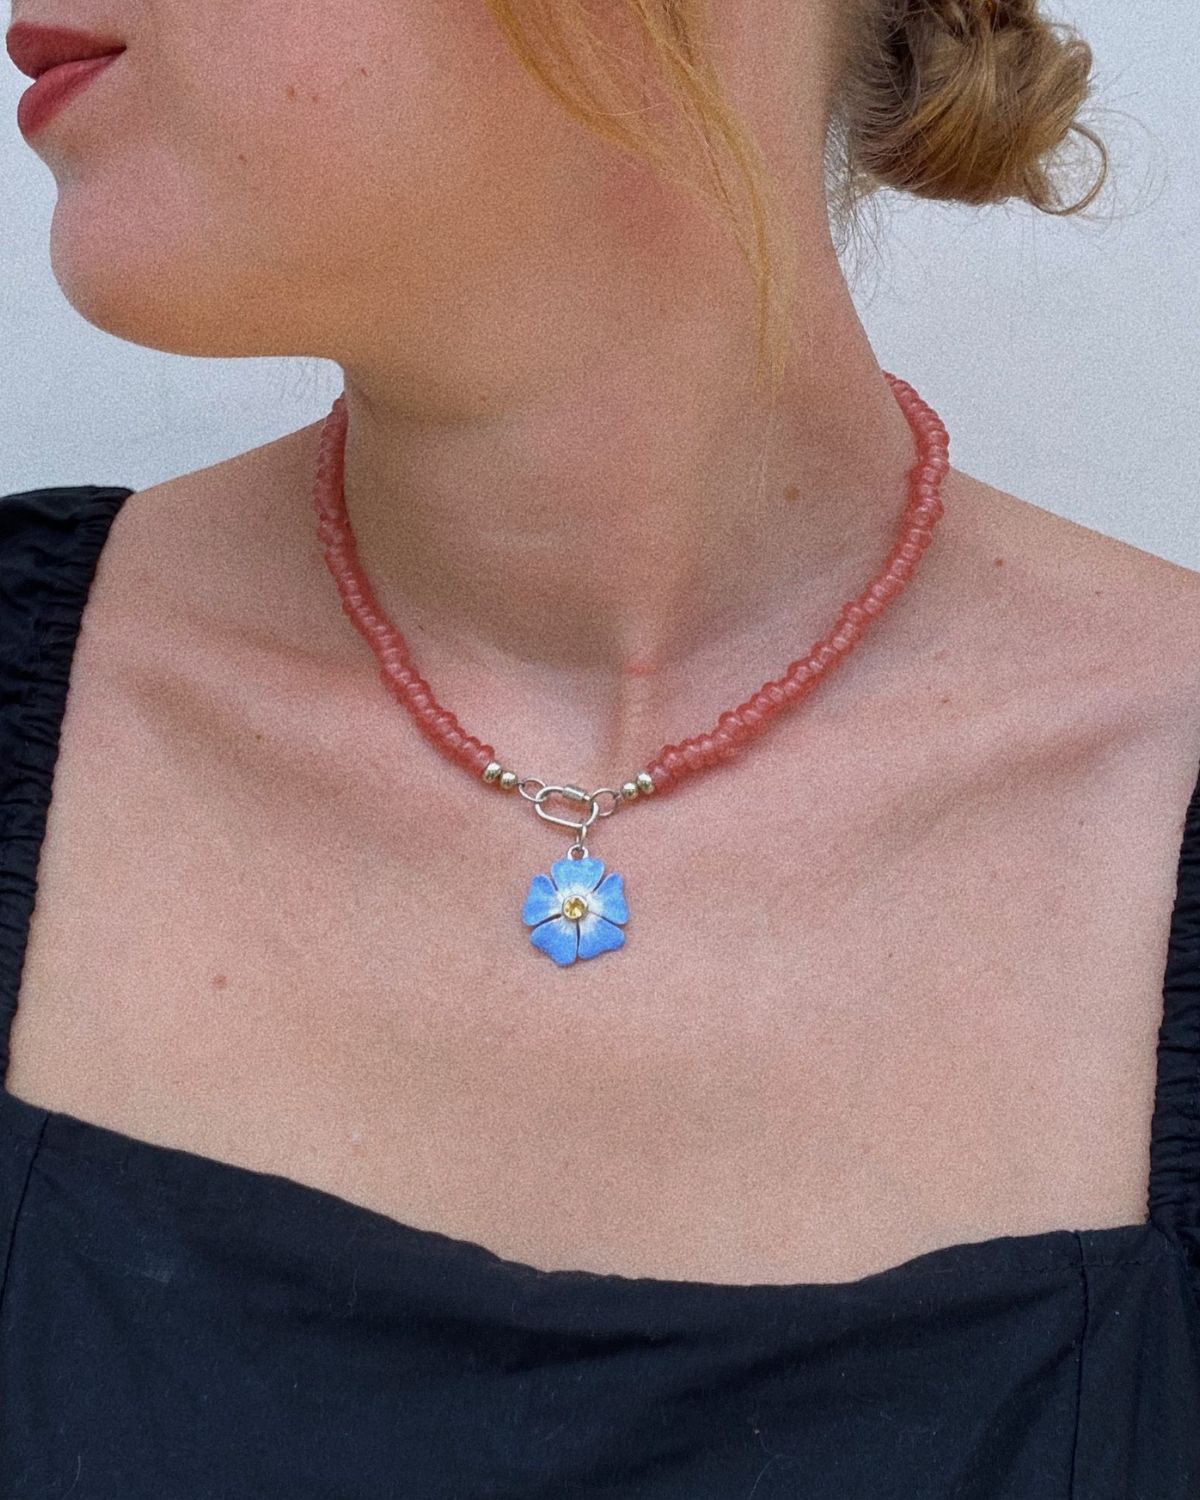 Forget-me-not pendant - sterling silver